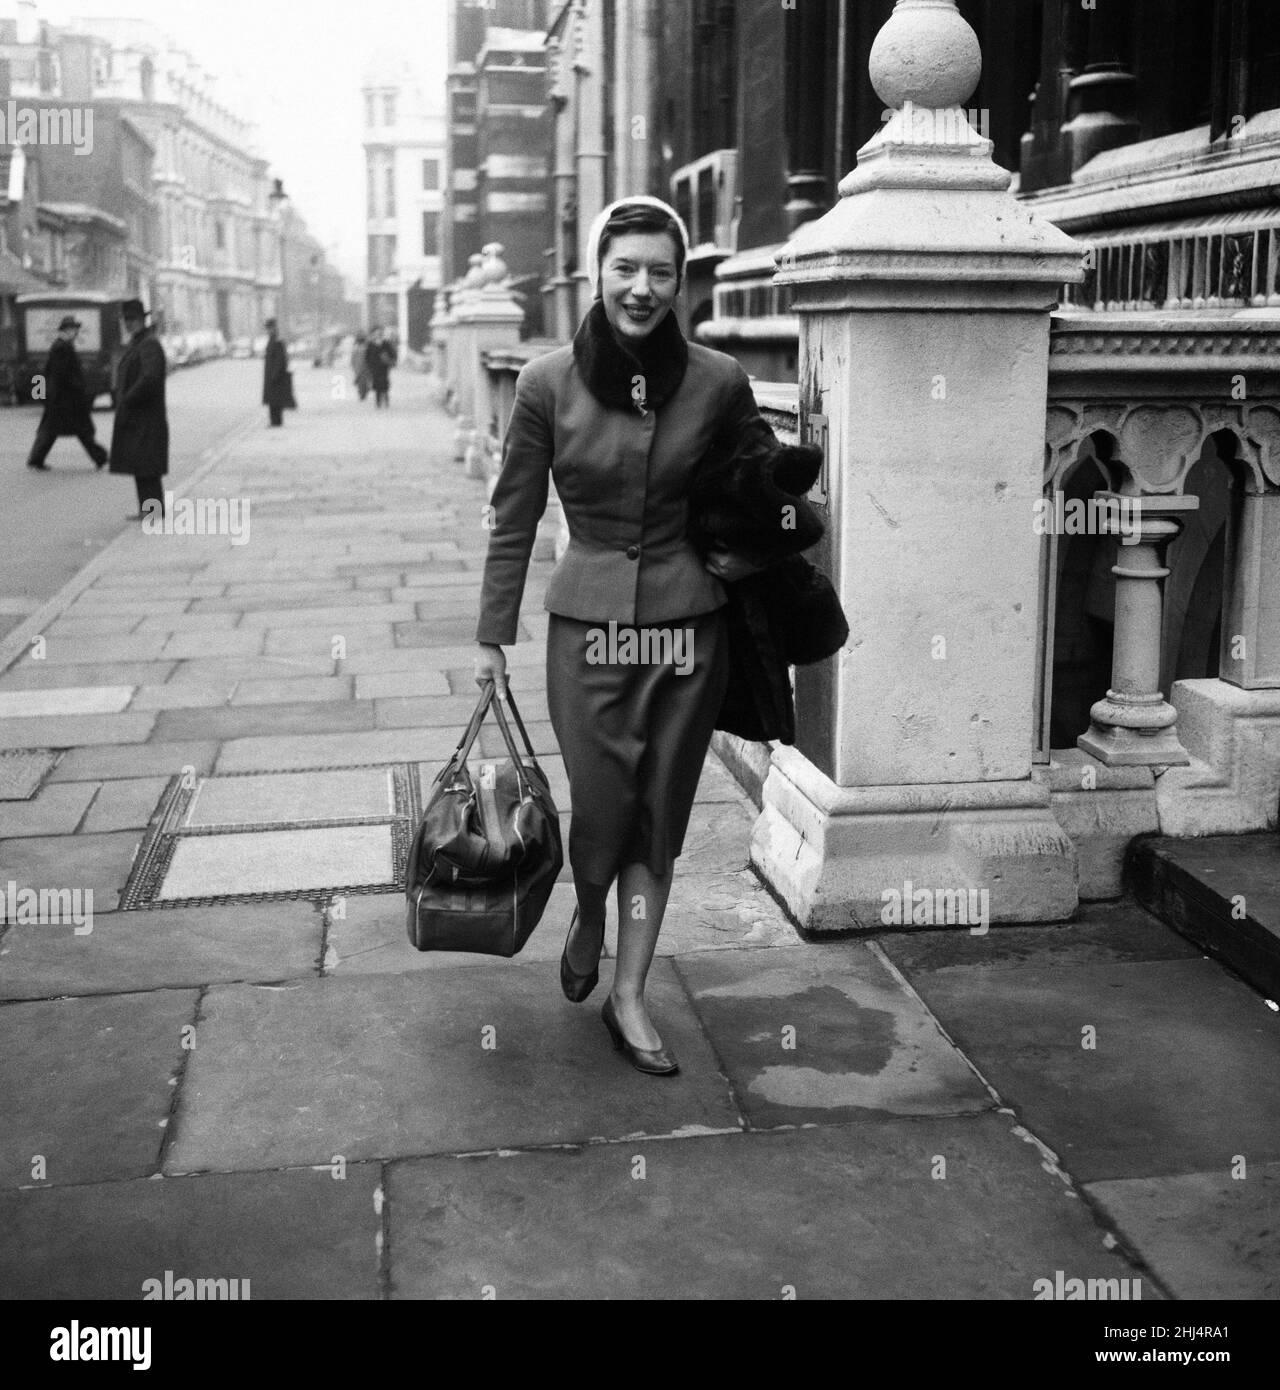 Ex-actress Pamela Berry stood up in the appeal court to plead with three judges that the laws of England were unfair to women. 14th December 1960. Stock Photo